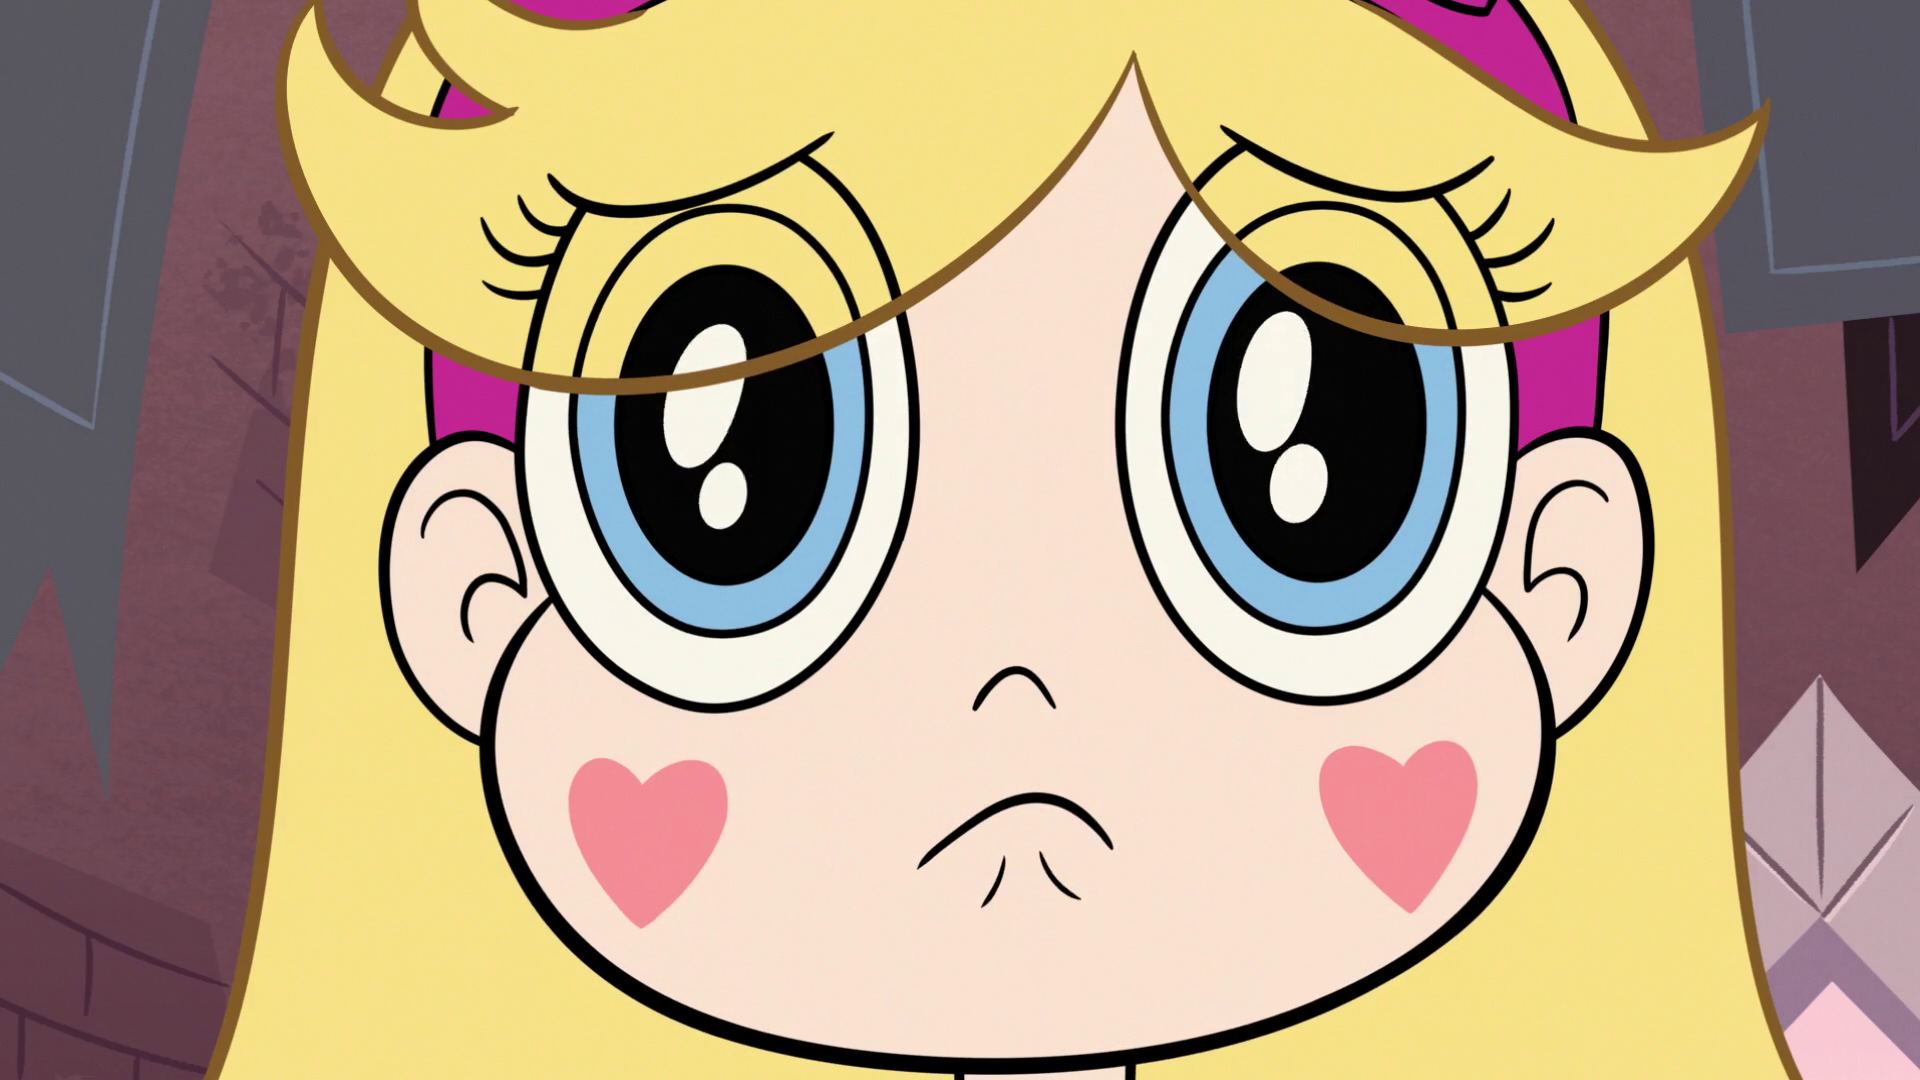 When you find out that Star vs. the Forces of Evil won't be one of the launch titles for Disney+